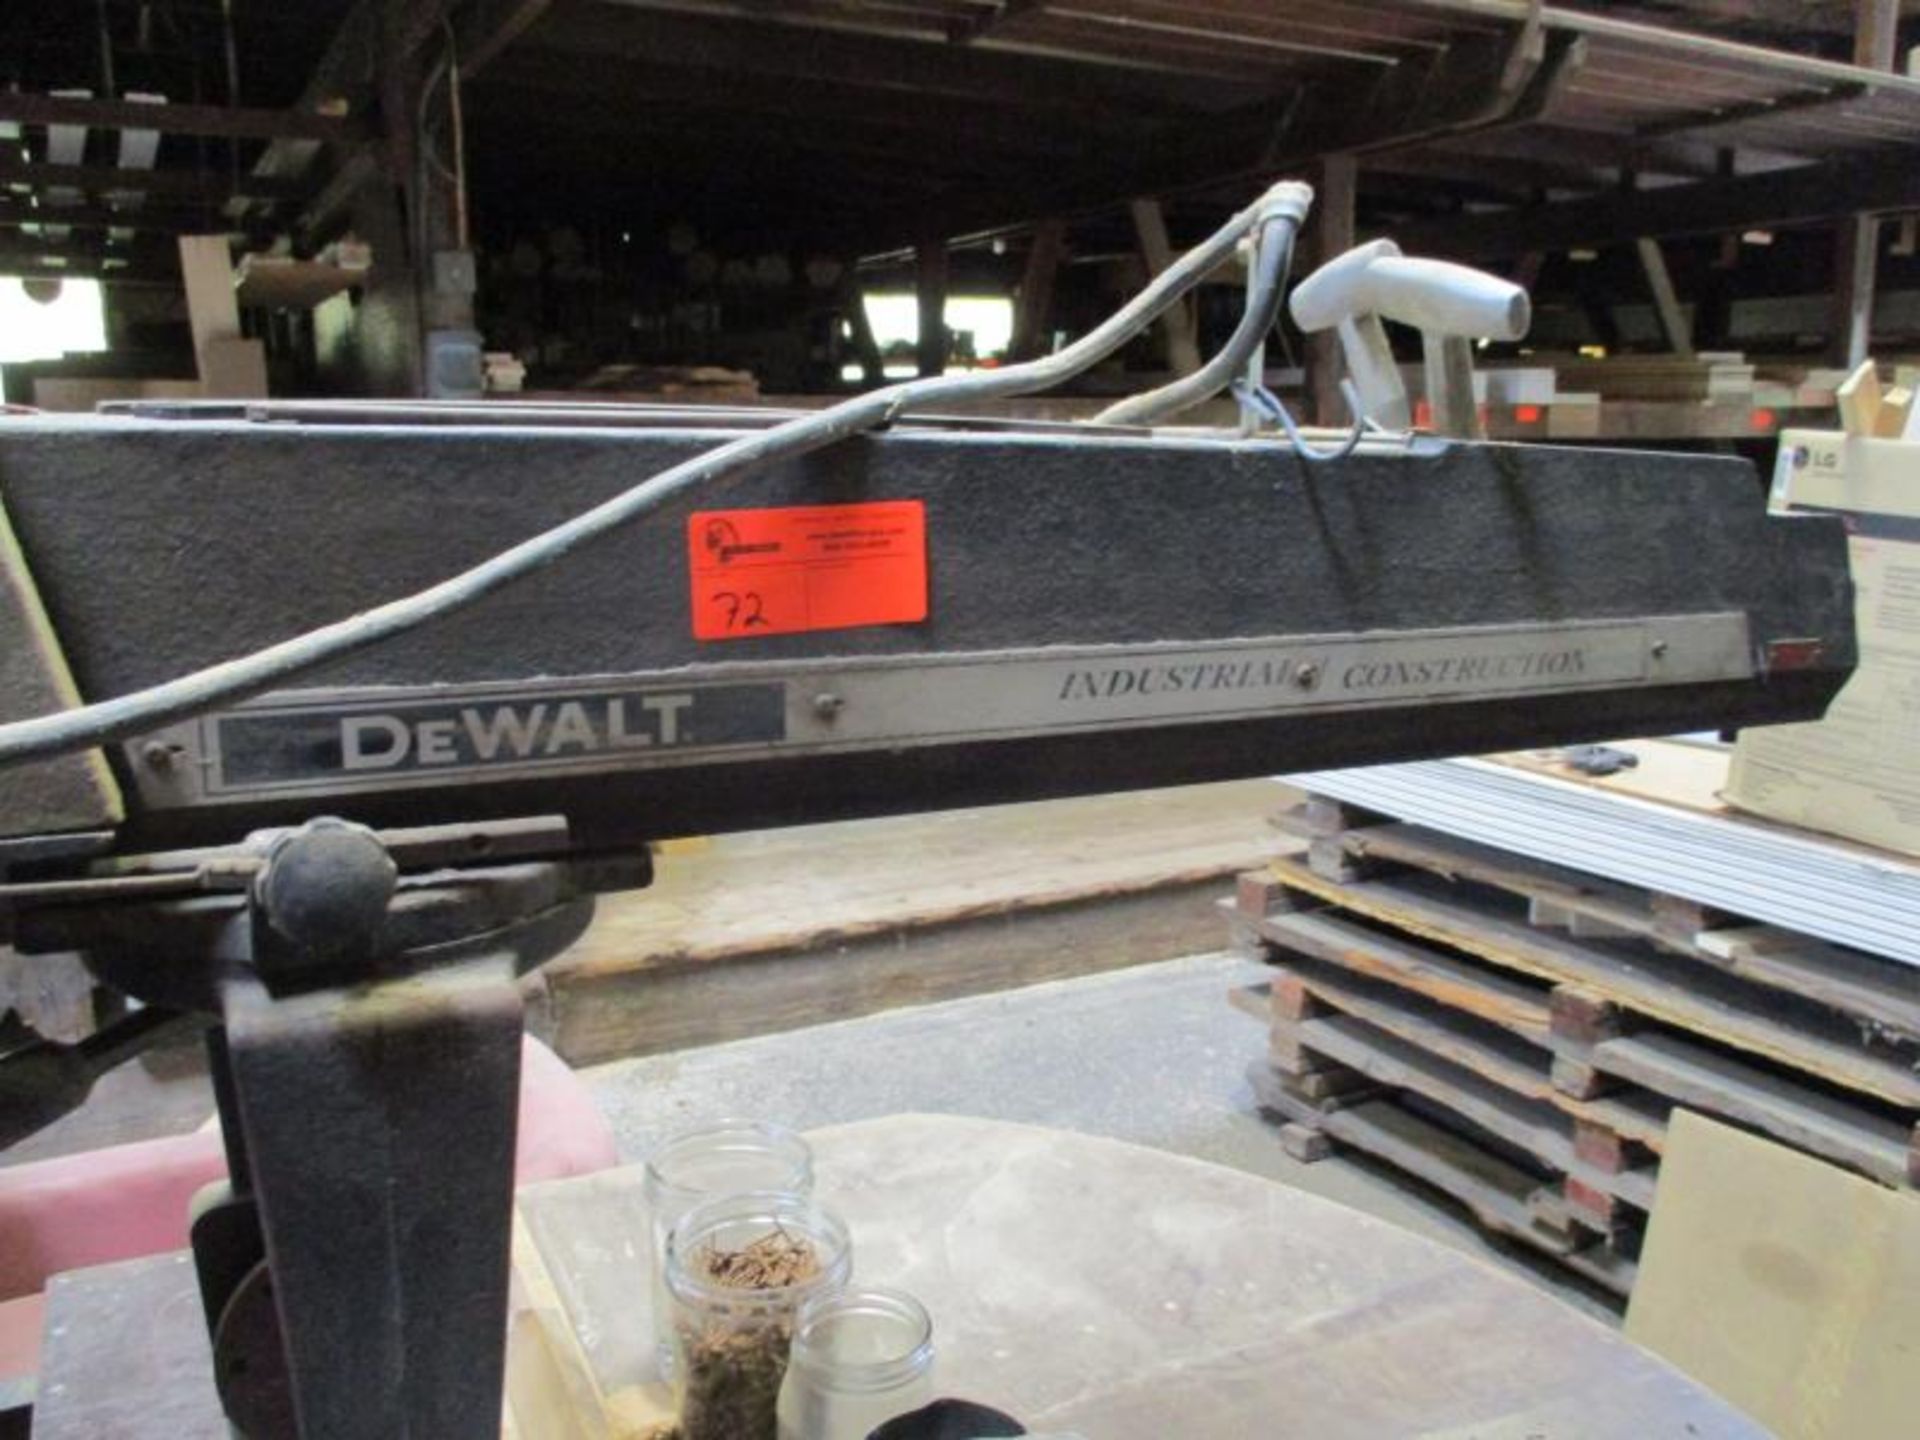 Dewalt Industrial Construction Radial Arm Saw - Not Working - Image 4 of 11